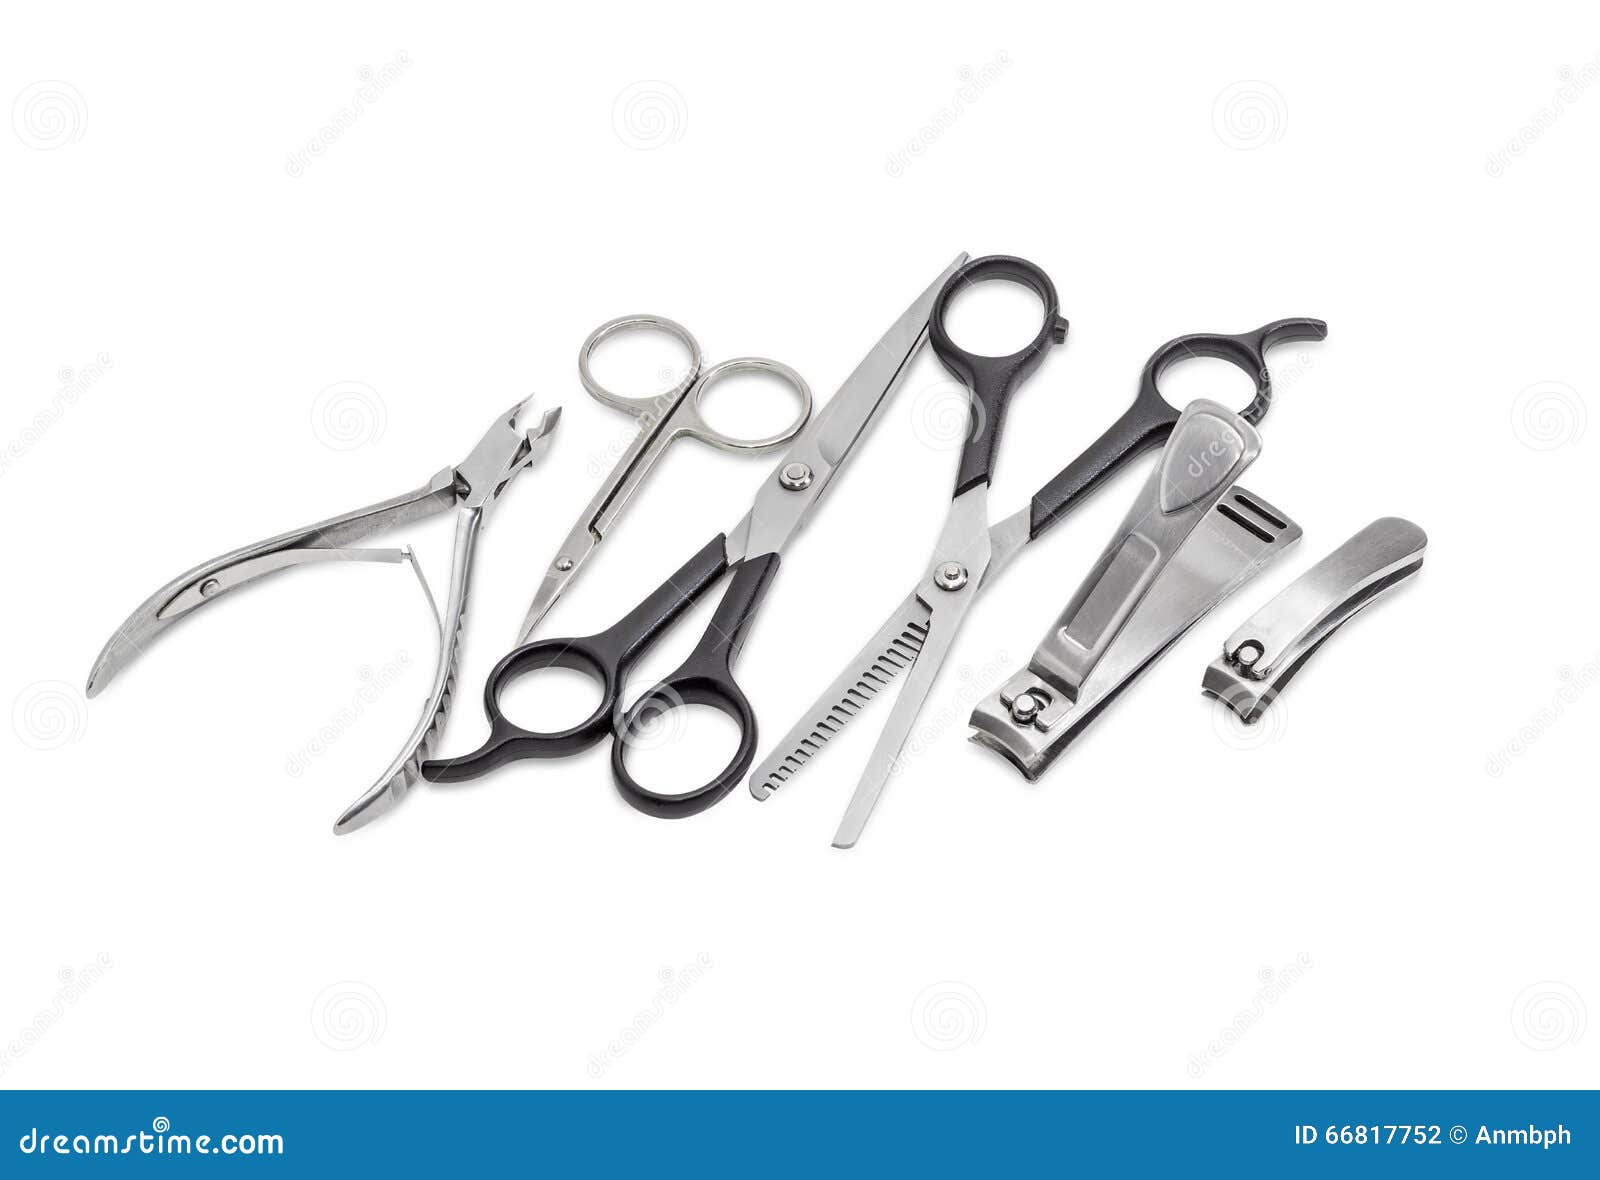 Several Different Nail Clippers, Nail Scissors and Two Hairdressers ...